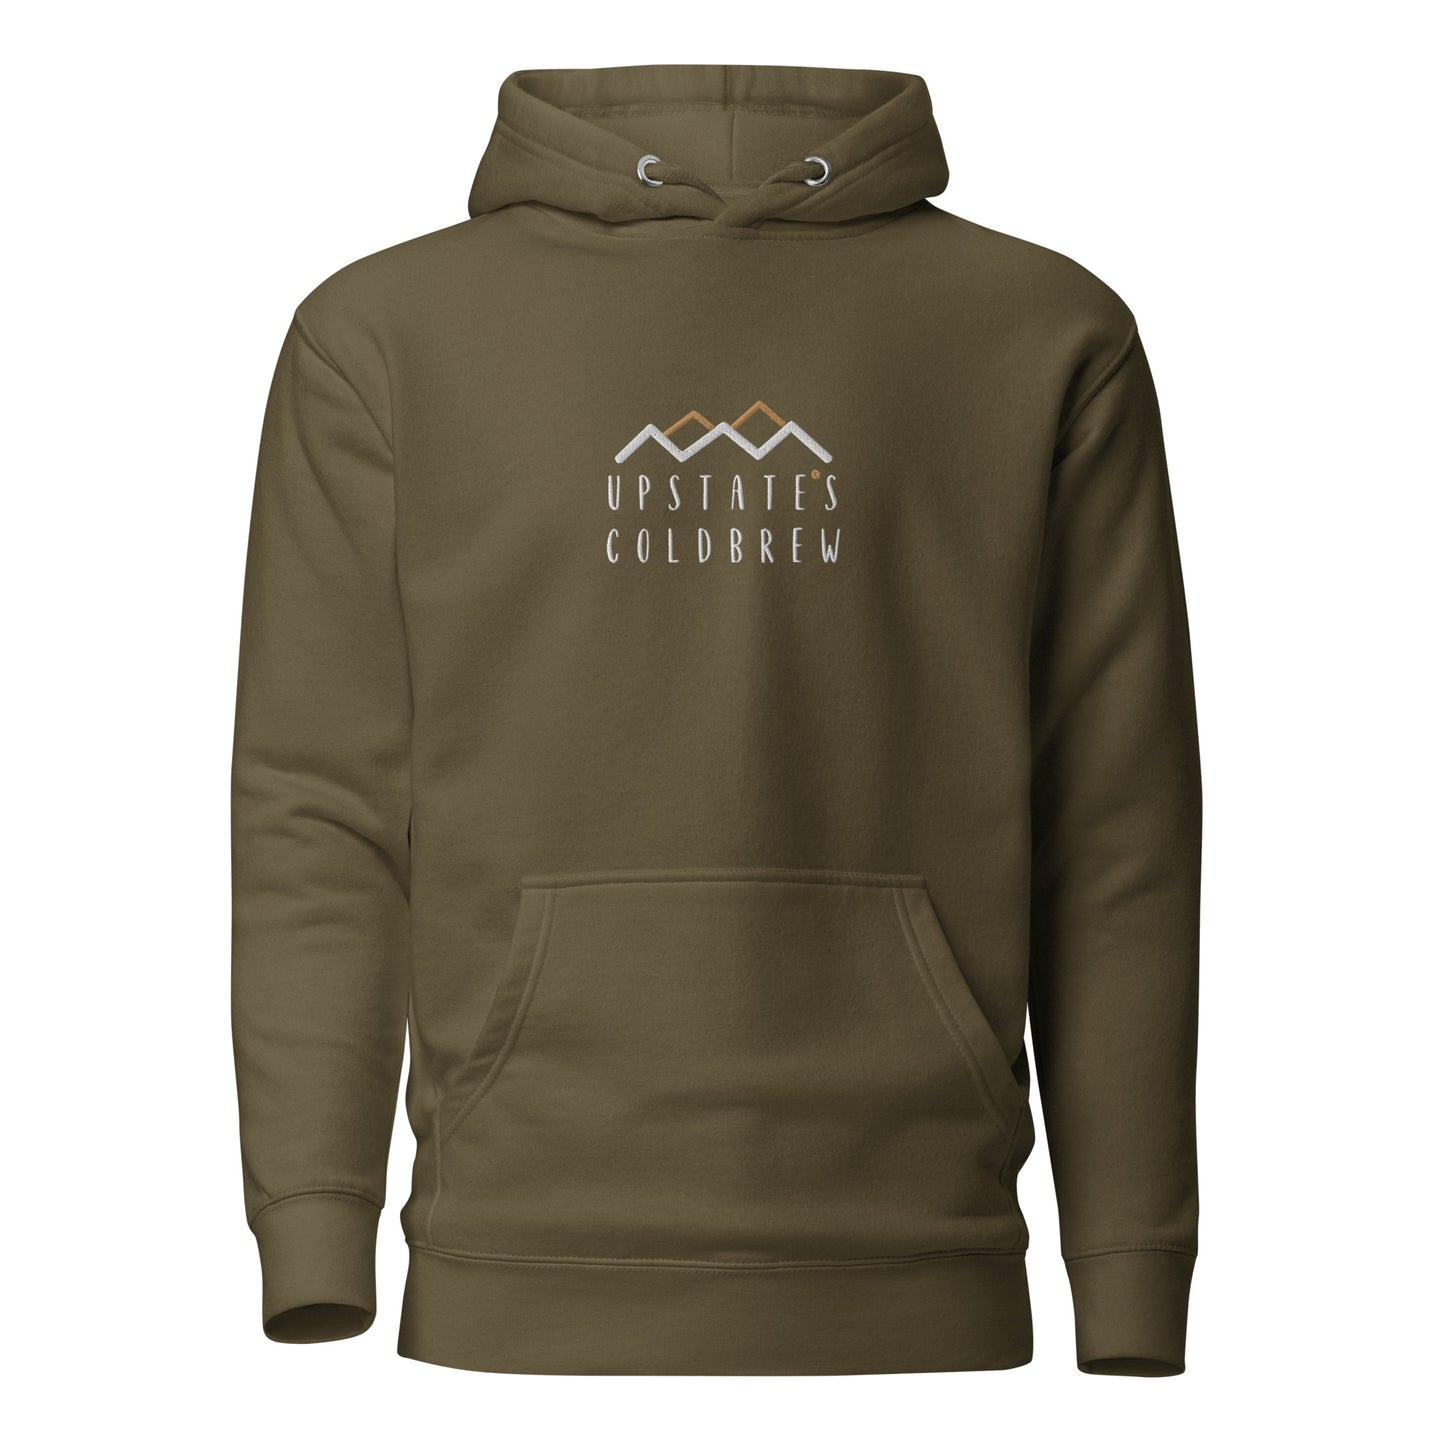 Upstate's Cold Brew Hoodie